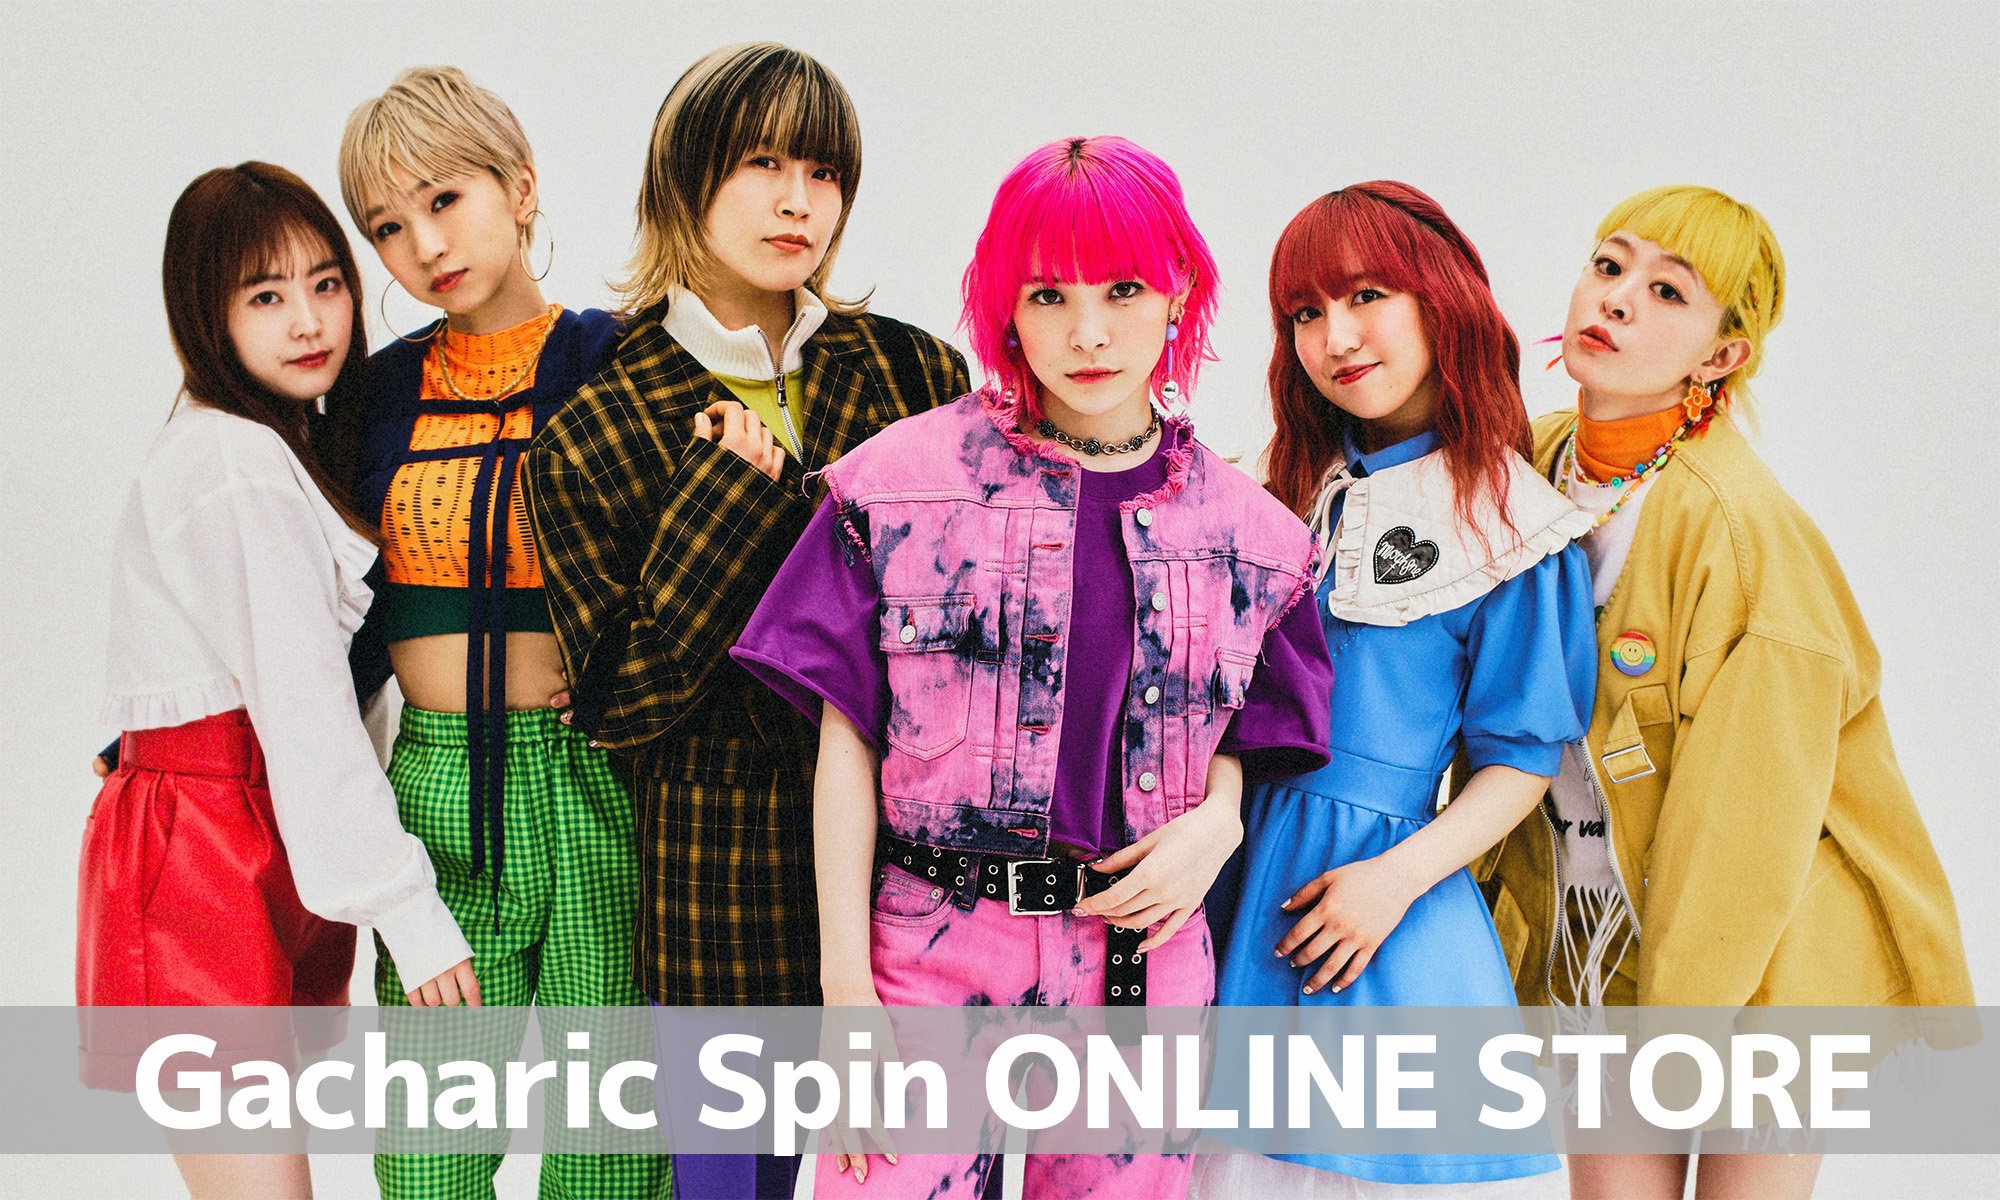 Gacharic Spin ONLINE STORE